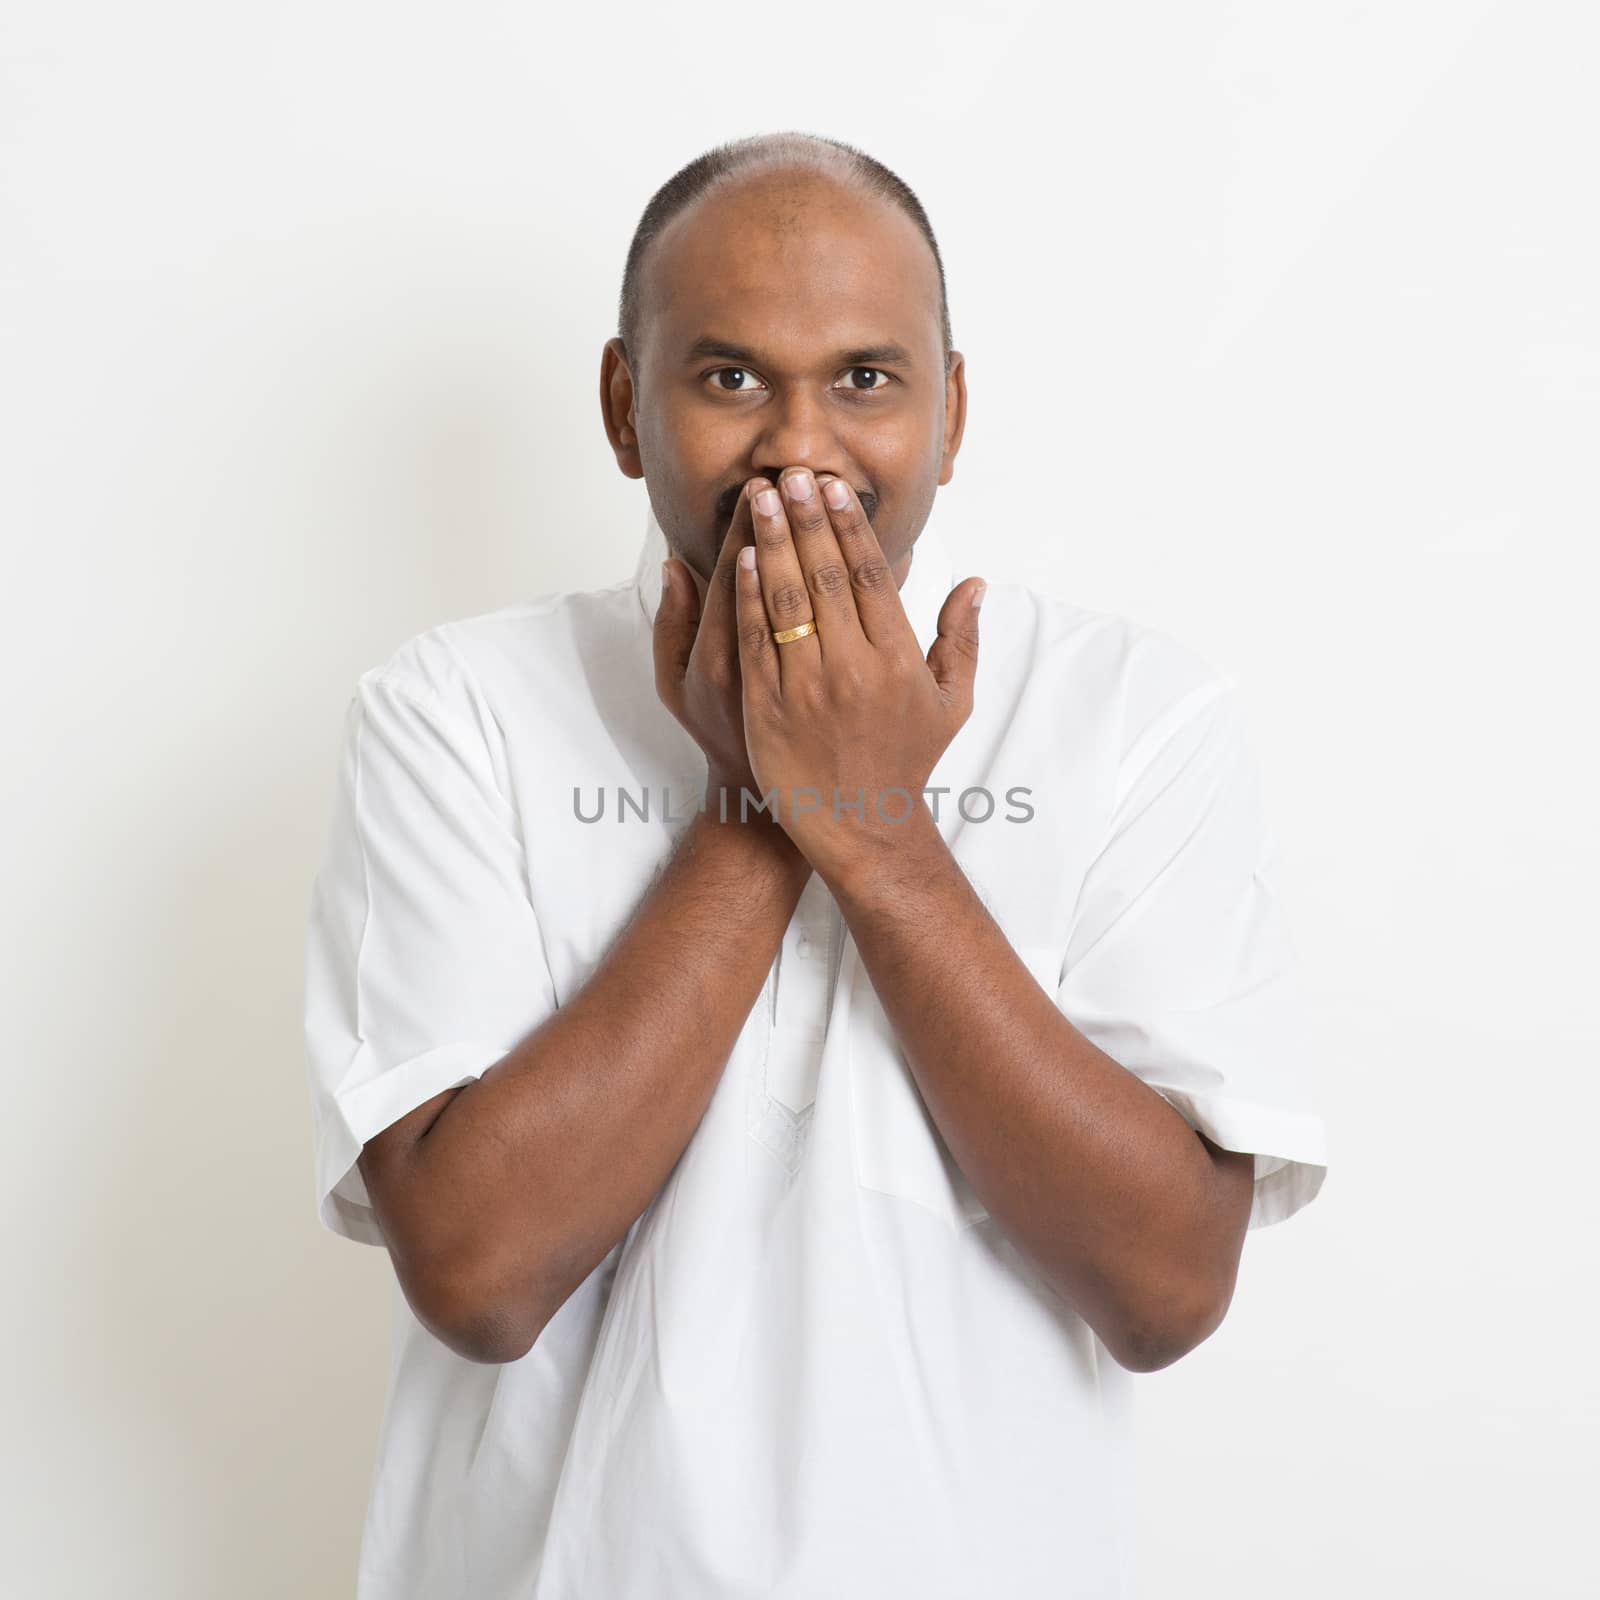 Portrait of mature casual business Indian man covered mouth, standing on plain background with shadow.